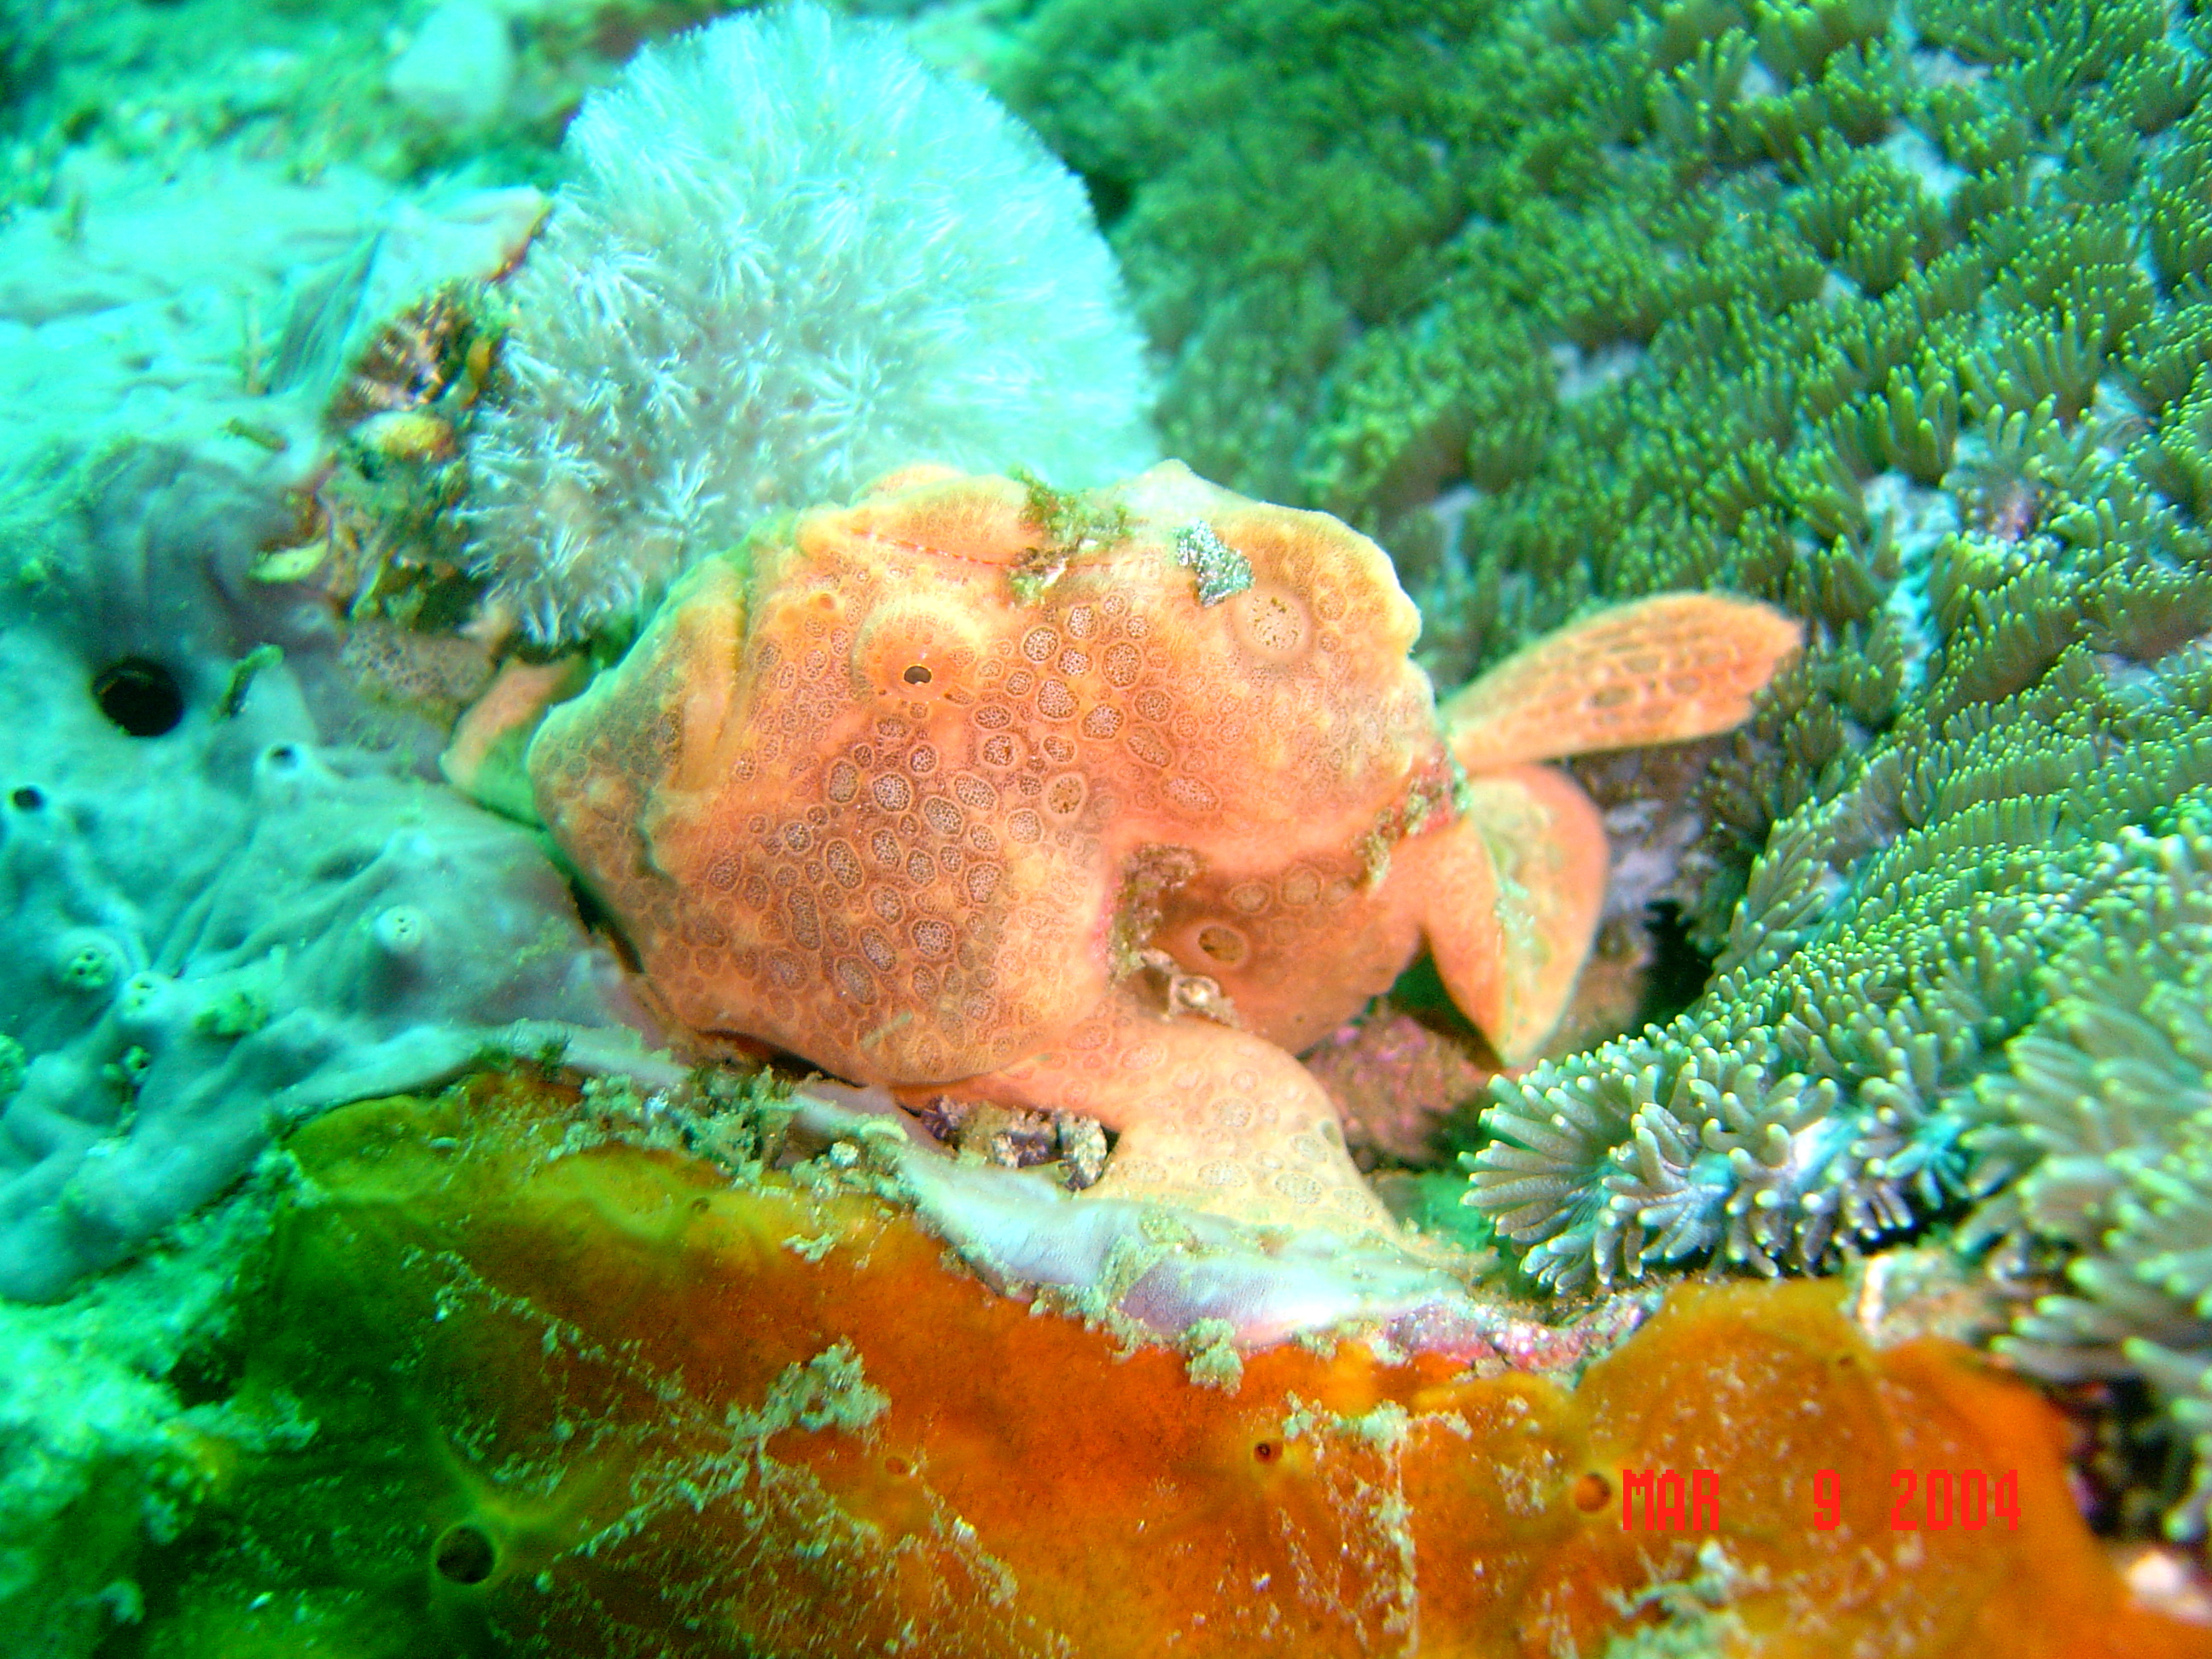 Gato Island, near Malapascua, Philippines.
Painted FrogFish, afternoon dive